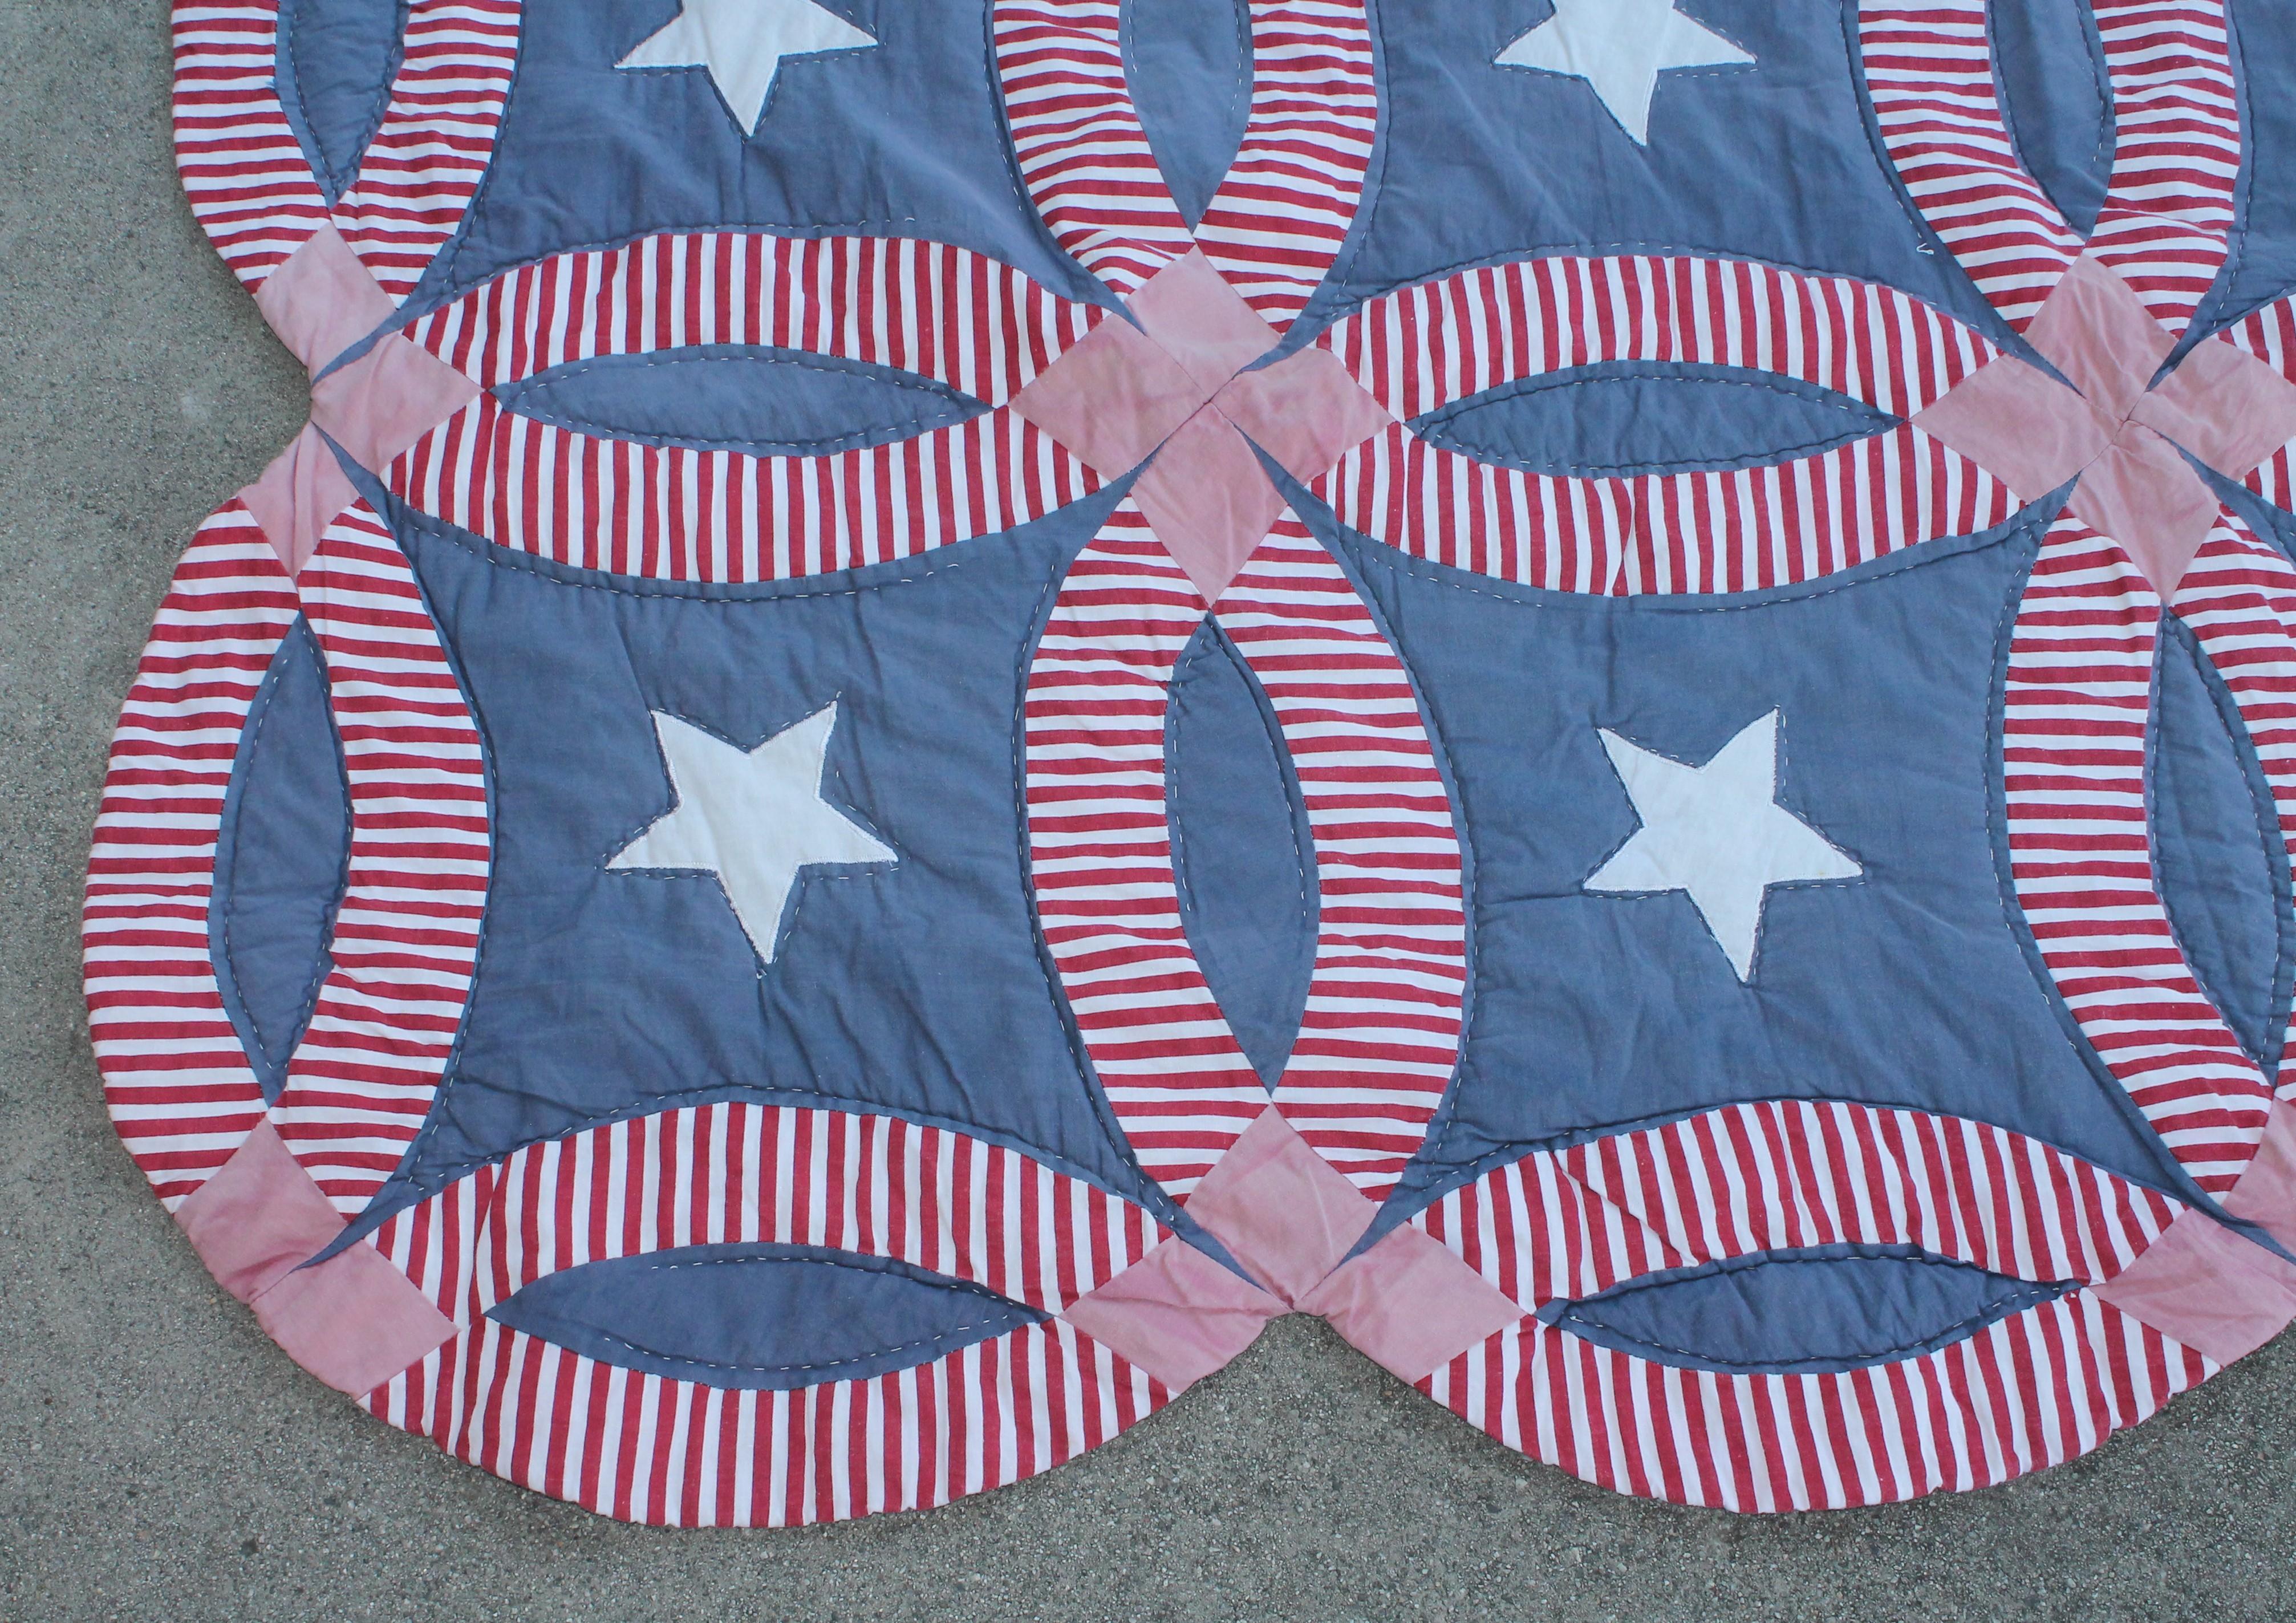 Hand-Crafted Vintage Quilt, Patriotic Wedding Ring